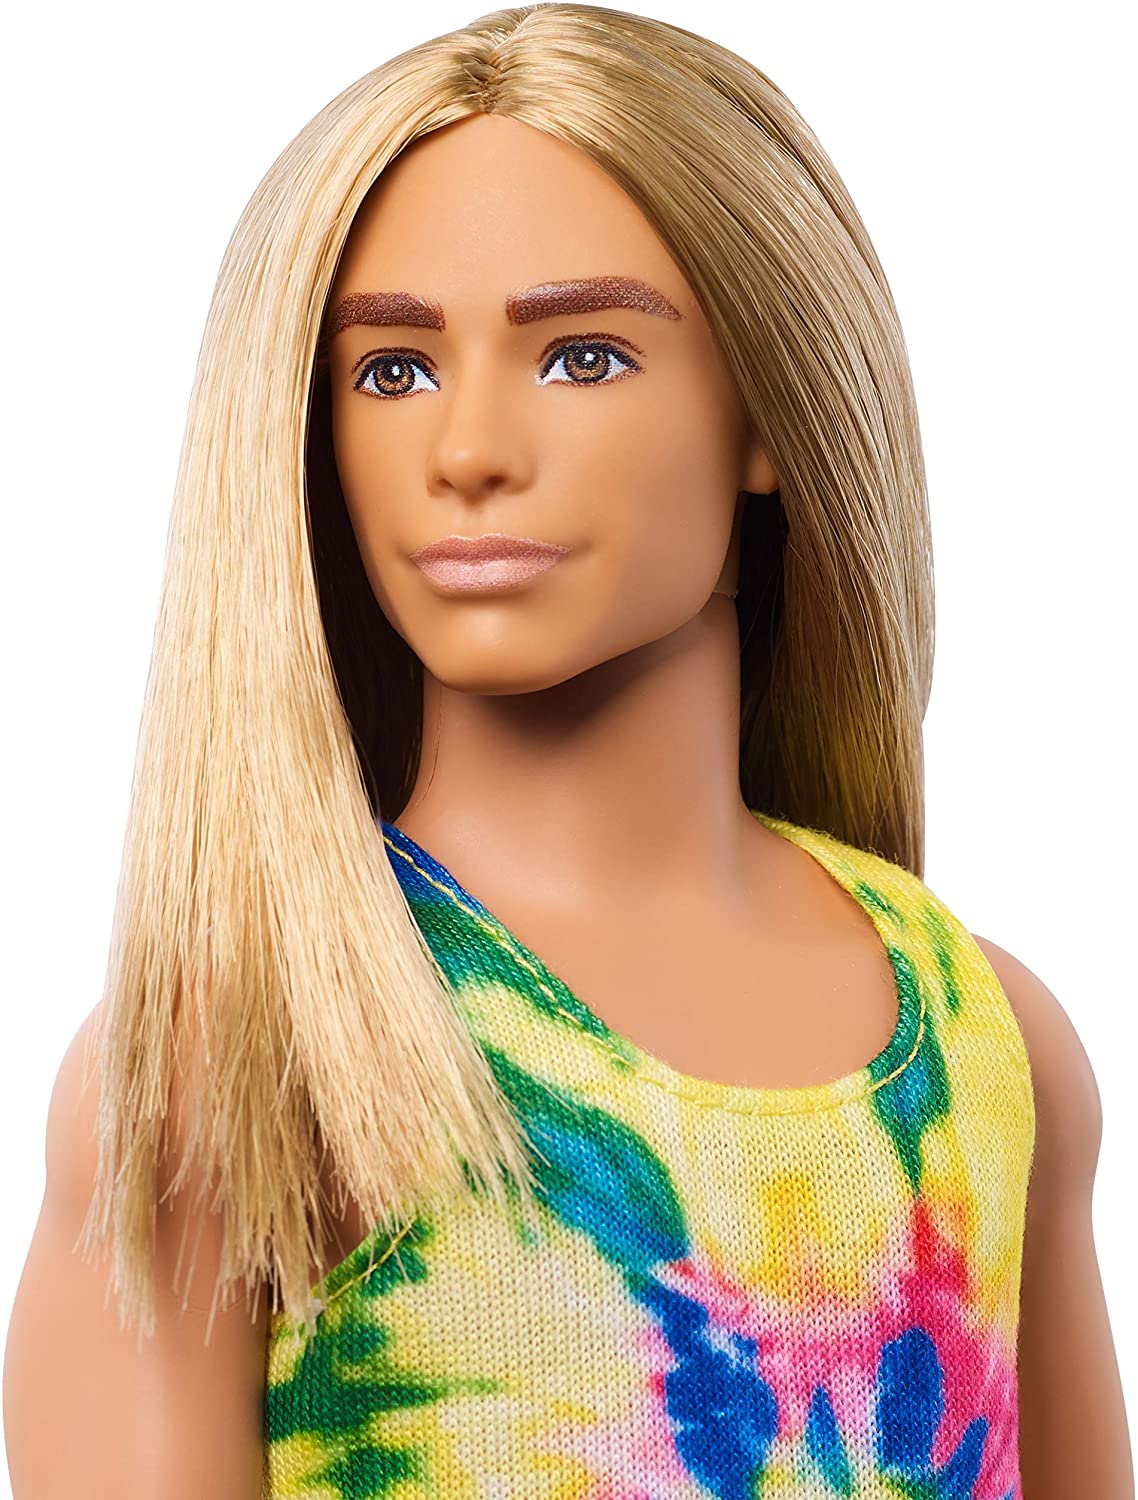 Ken Fashionistas Doll with Long Hair | IVI 3D Play Carpets